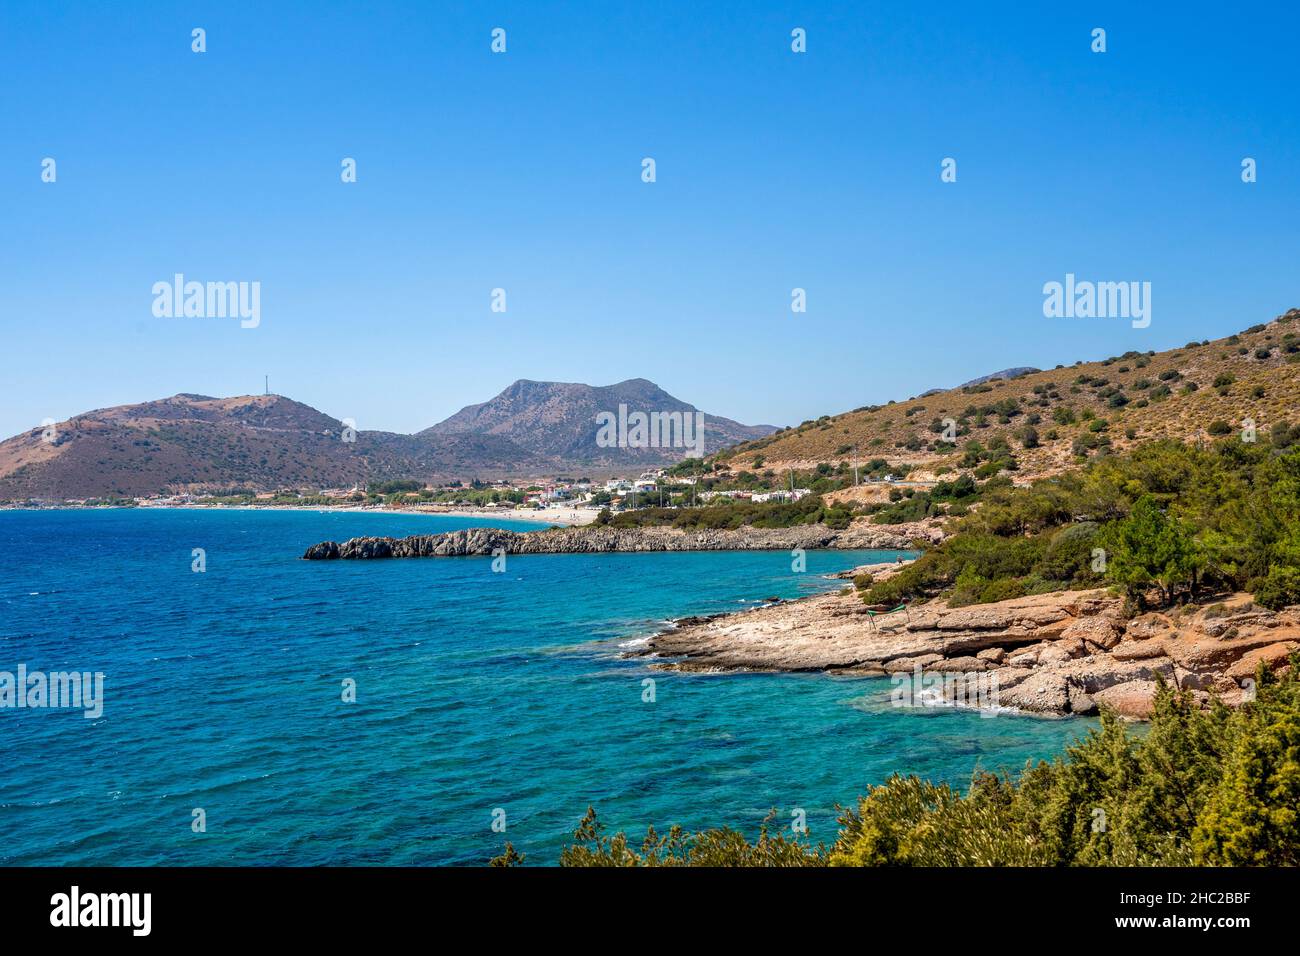 View of Aquarium Bay in Datca. Datca is a district of Mugla Province in southwest Turkey. Stock Photo